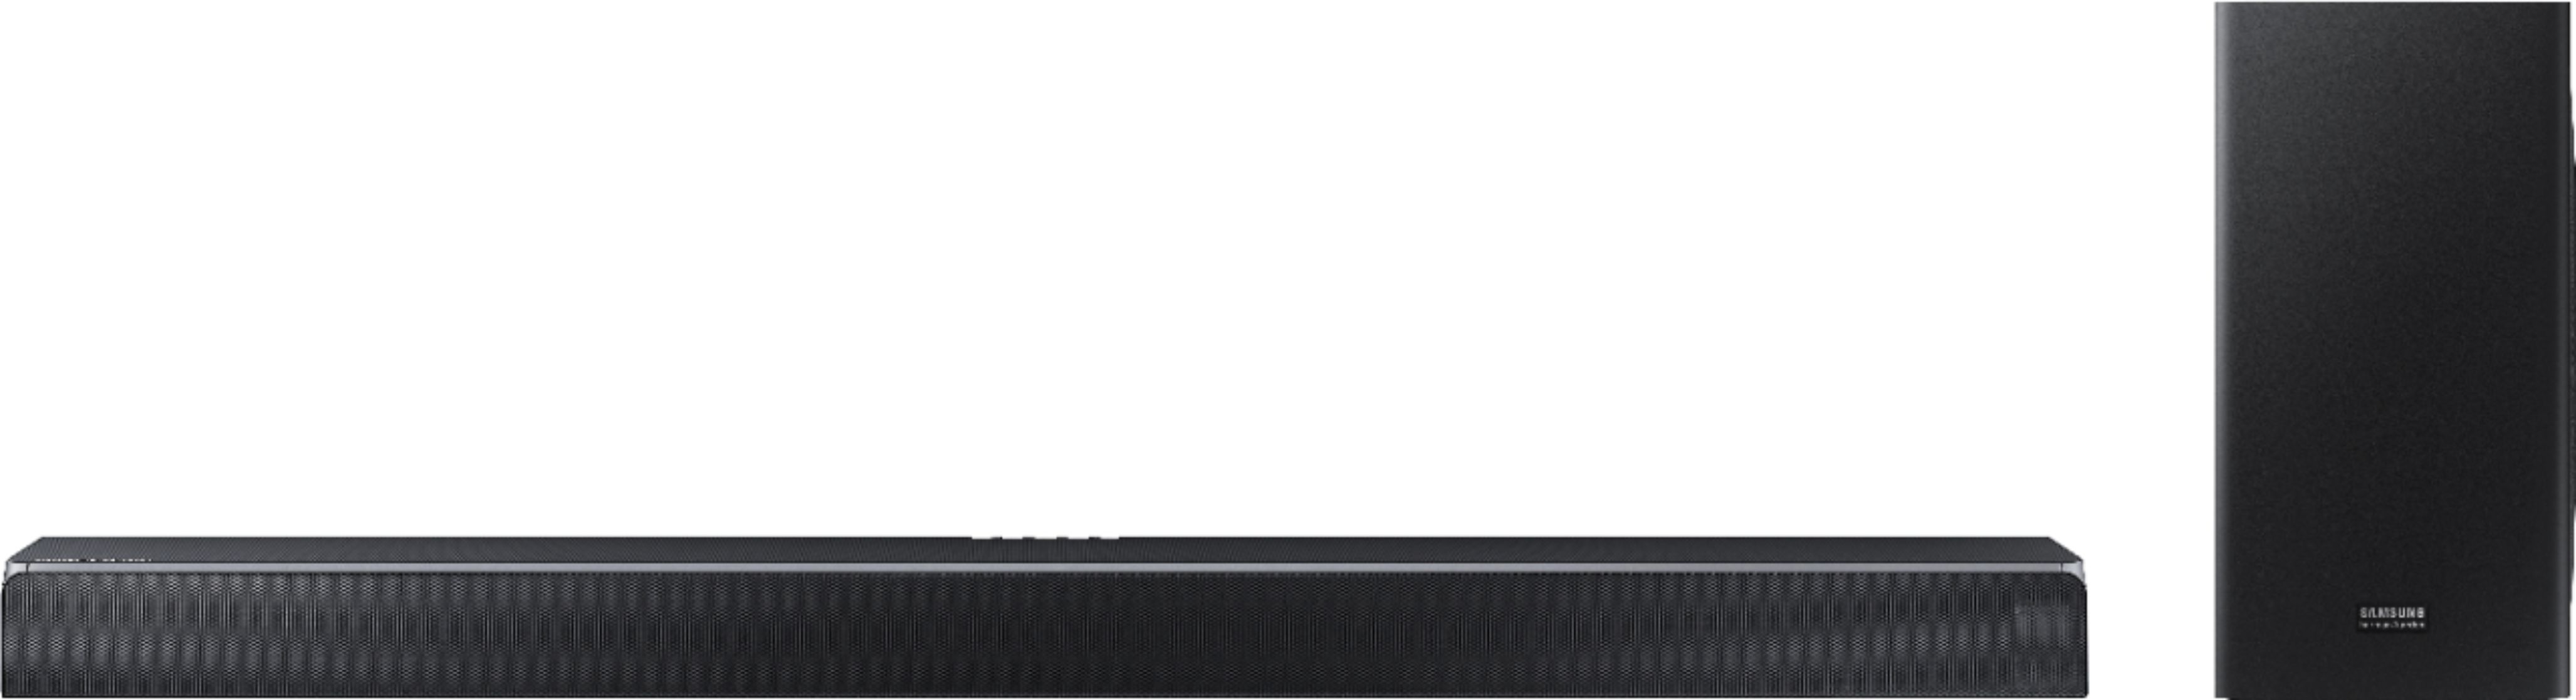 Customer Reviews: Samsung Harman Kardon 5.1.2-Channel Soundbar System with 8" Wireless Subwoofer and 4K HDR Support Slate Black/Carbon Silver HW-Q80RZA - Best Buy